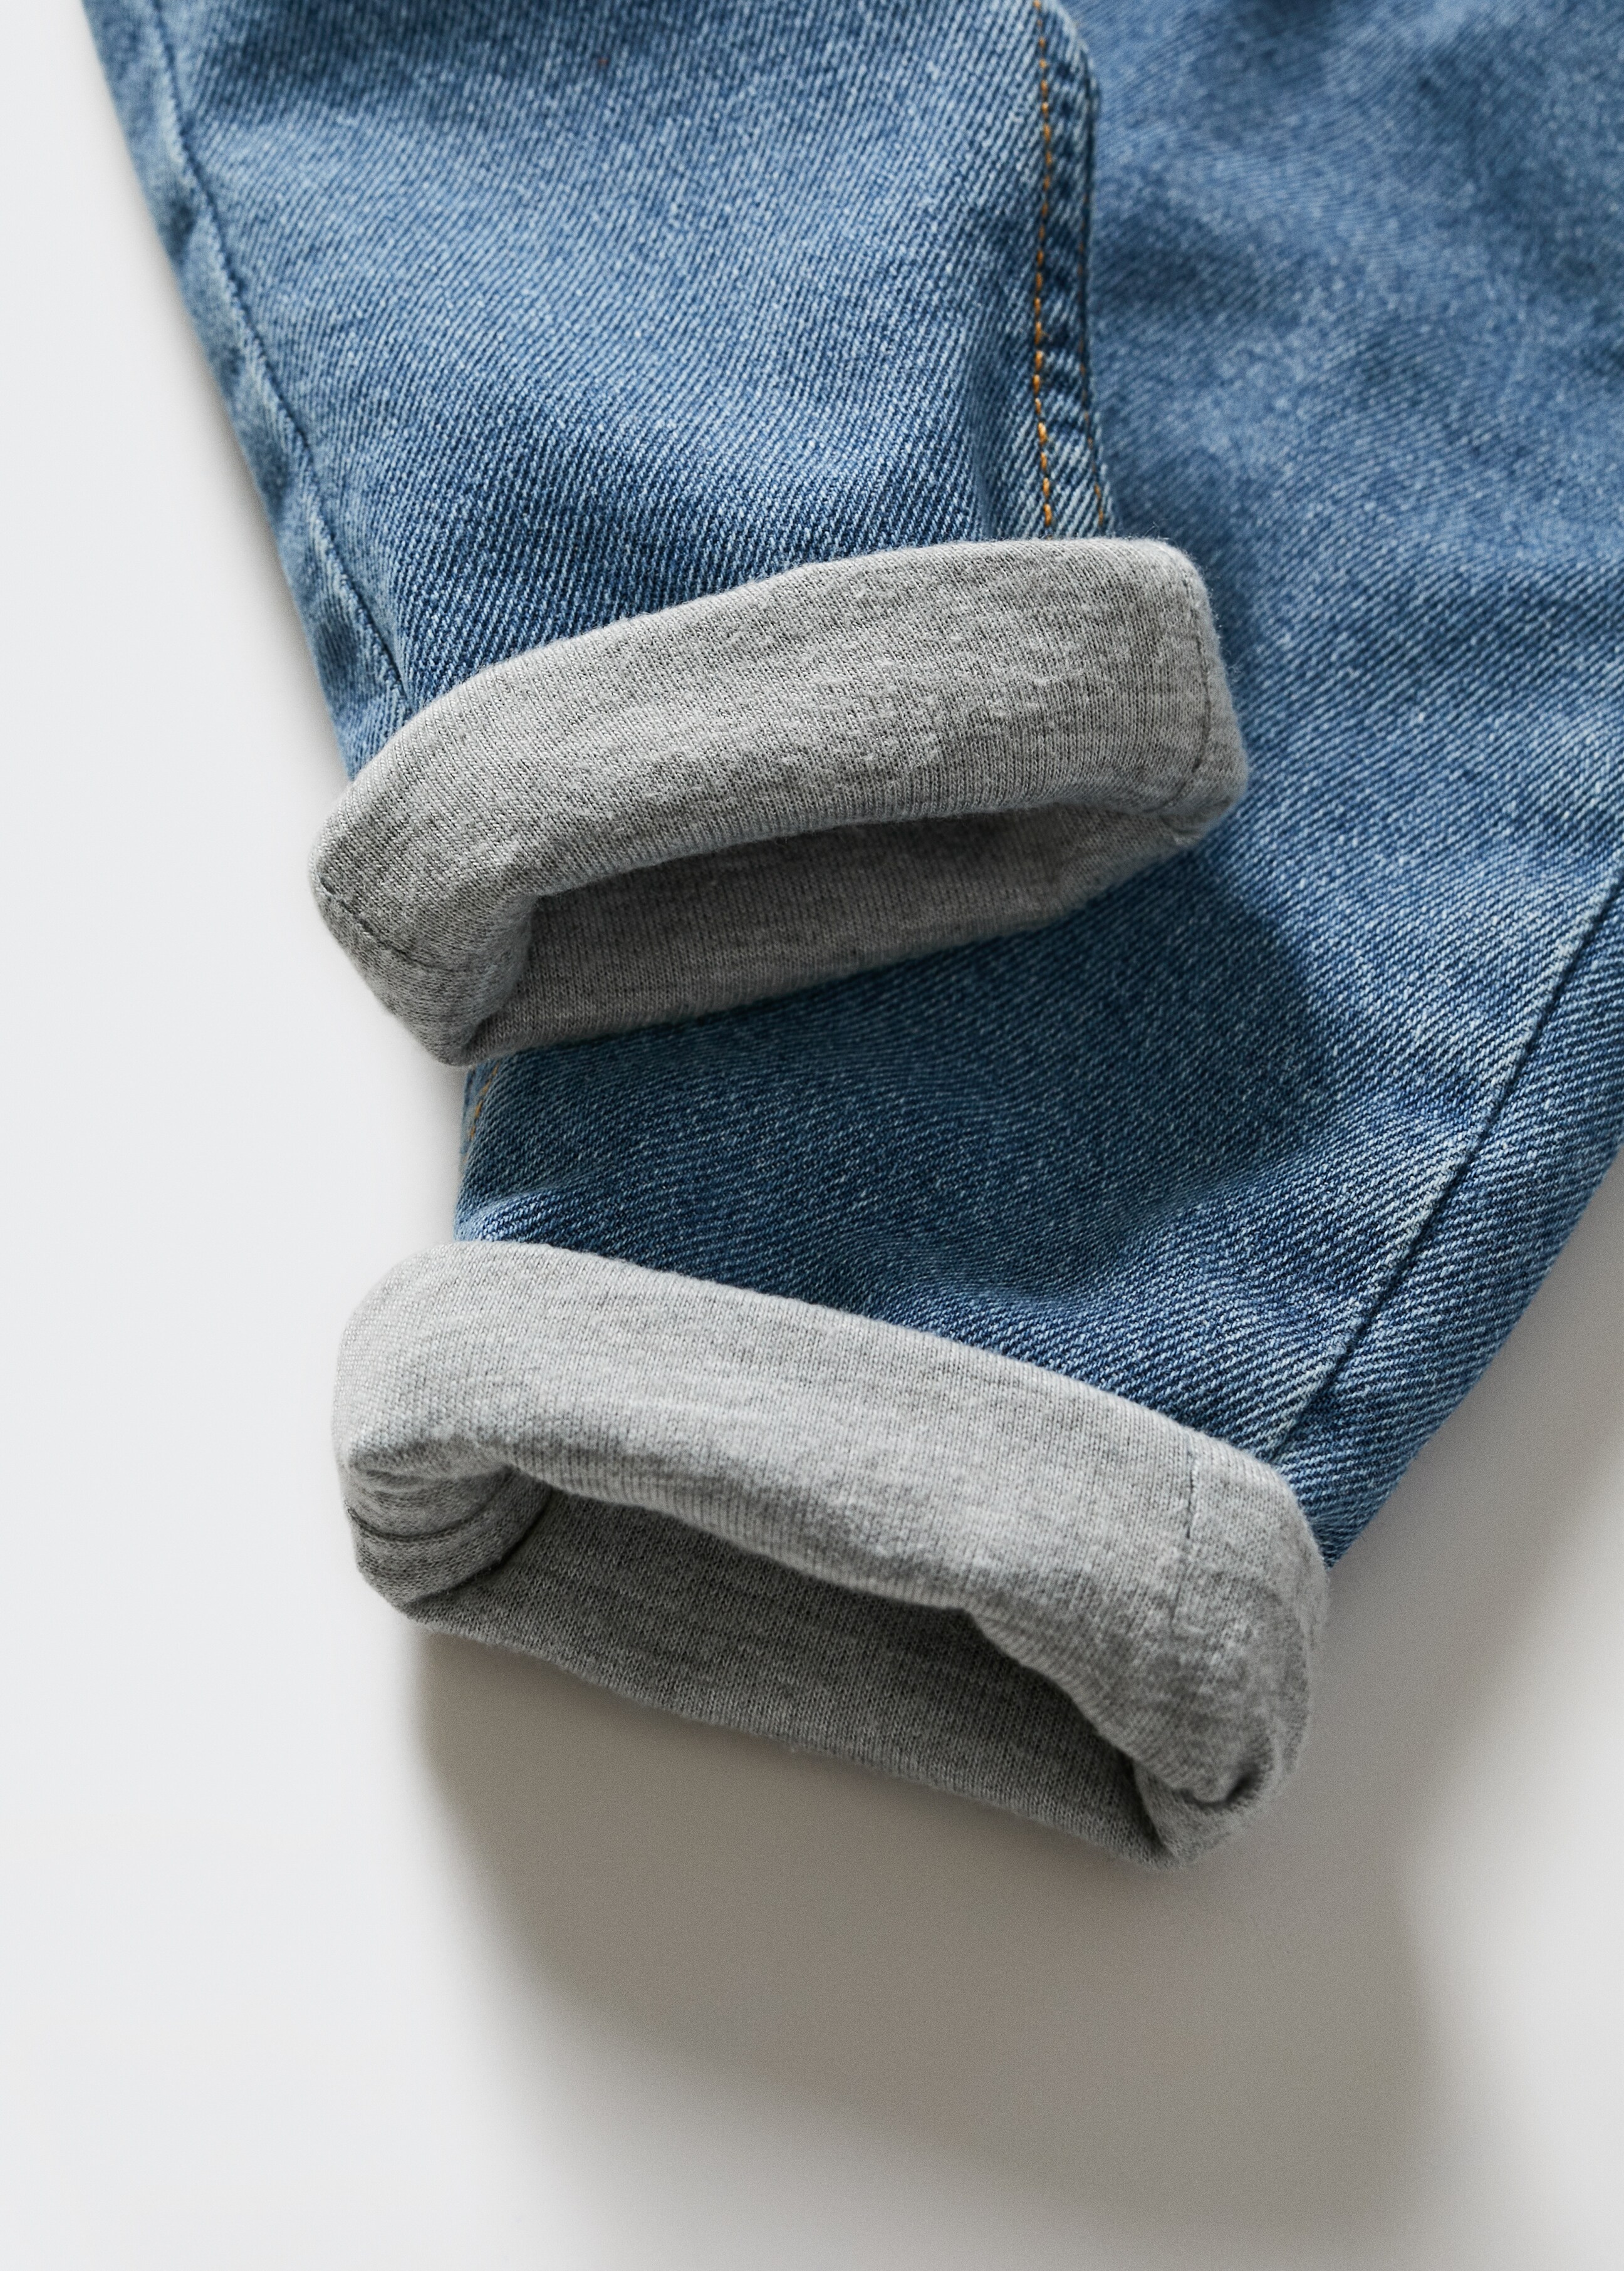 Lined denim dungarees - Details of the article 9